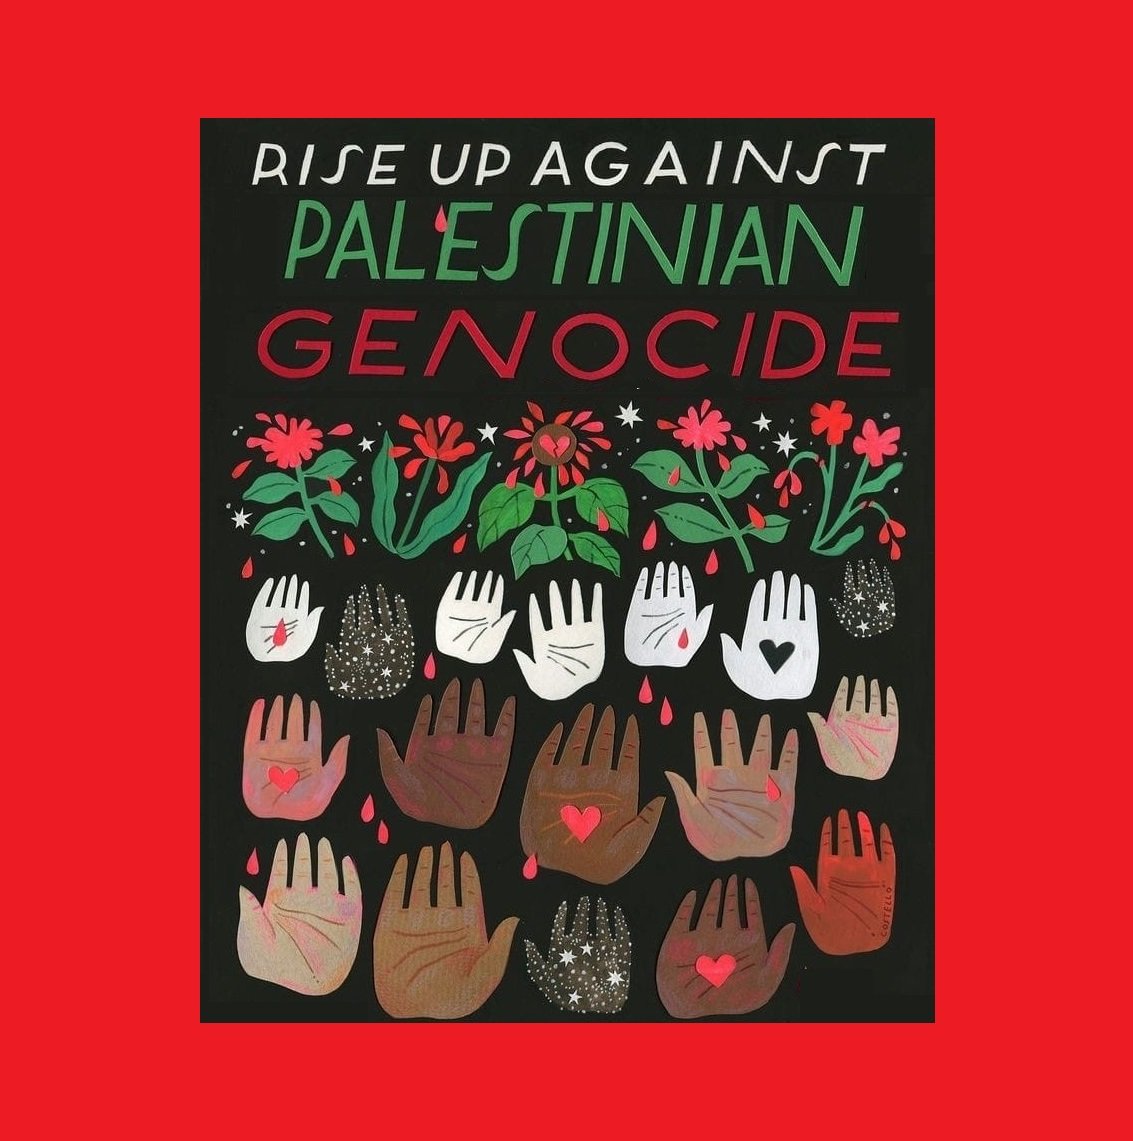 It's what all decent people should.

15'780 children killed in Gaza shouldn't matter less because they ain't white children.

#CeaseFirelnGaza 
#EndGenocide 
#EndPalestinianGenocide
#IsraelIsATerroristState 
#IsraeliWarCrimes 
#IsraeliButchers
#PalestinianLivesMatter